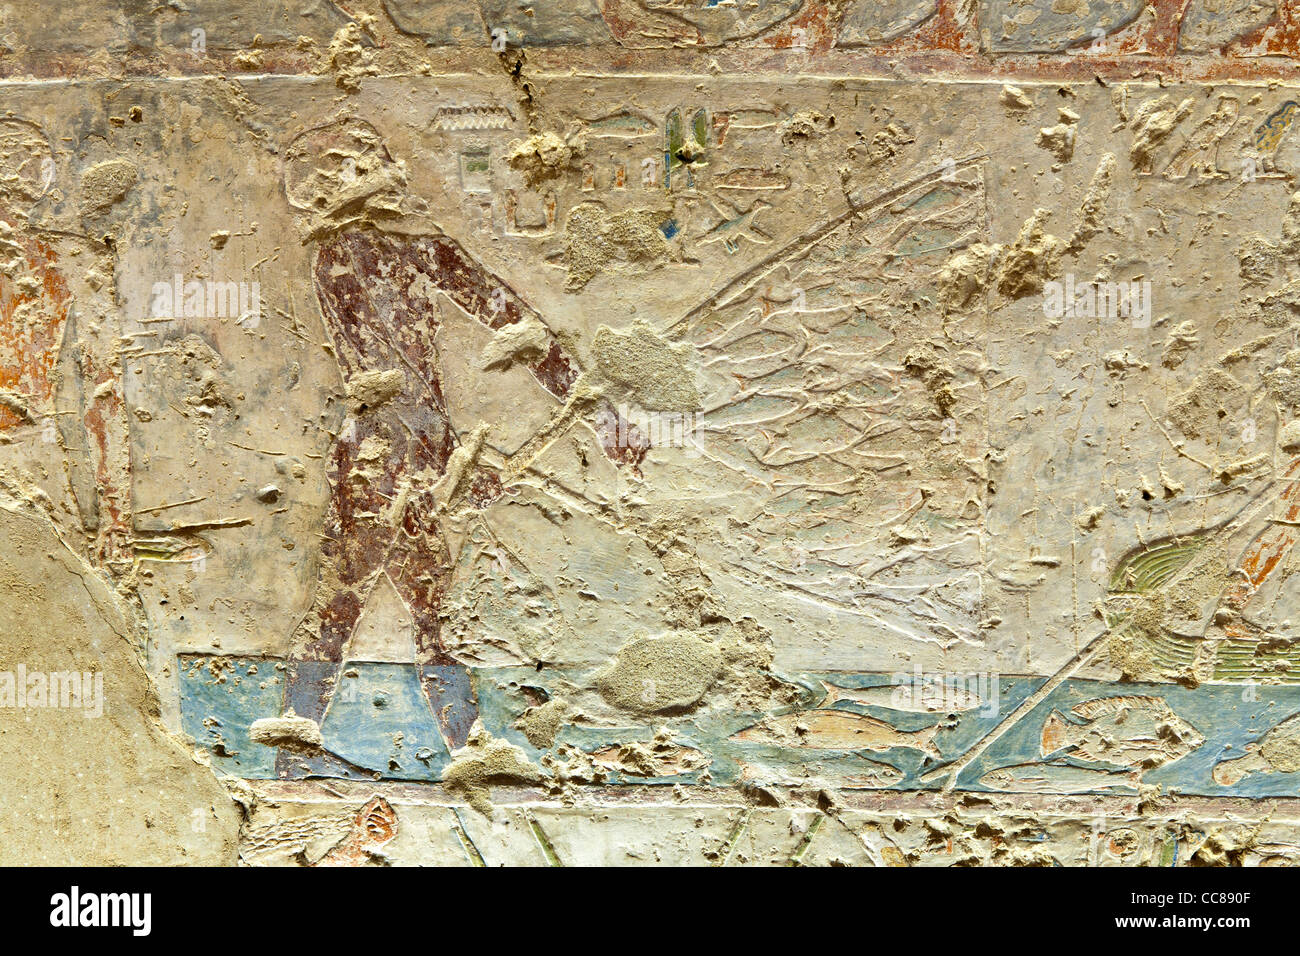 Reliefs in the Middle Kingdom tomb of Senbi Son of Ukh Hotep at Meir , North West of Asyut in Middle Egypt Stock Photo